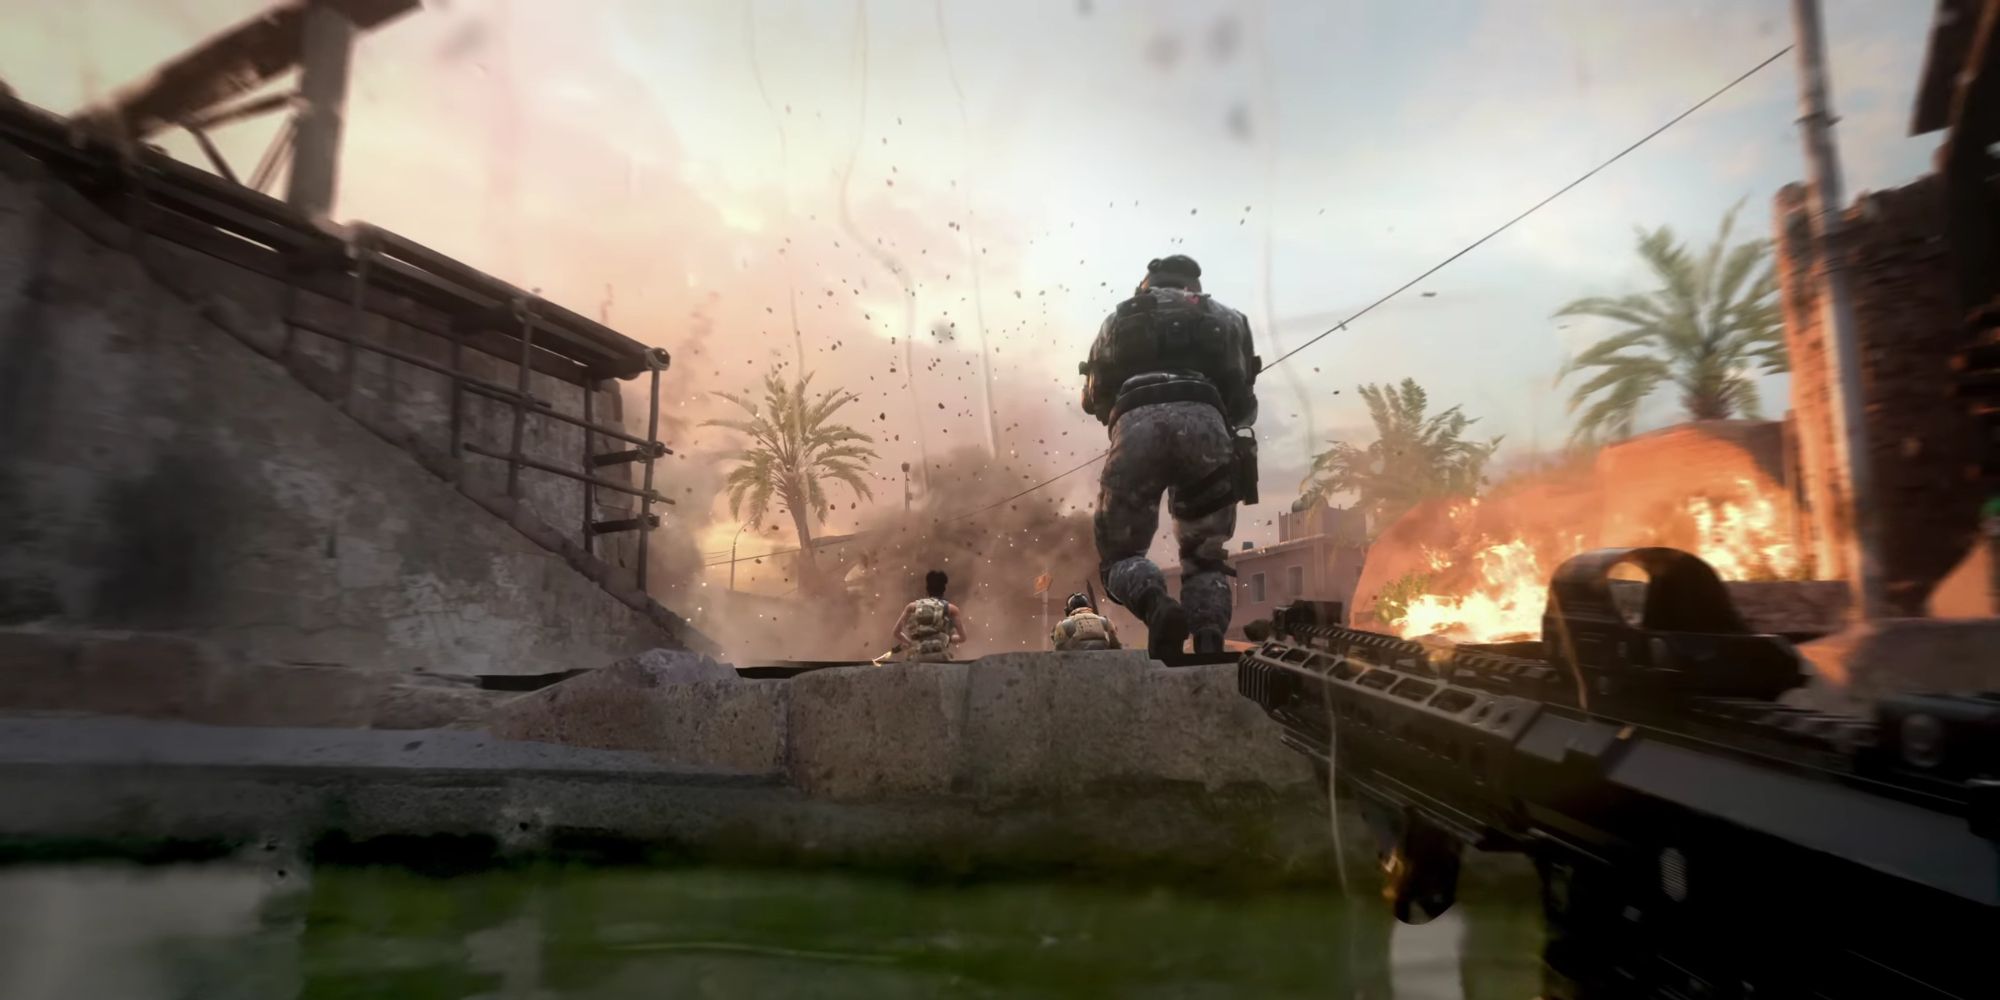 A gameplay screenshot of a player swimming with their weapon near an explosion in COD Warzone DMZ.